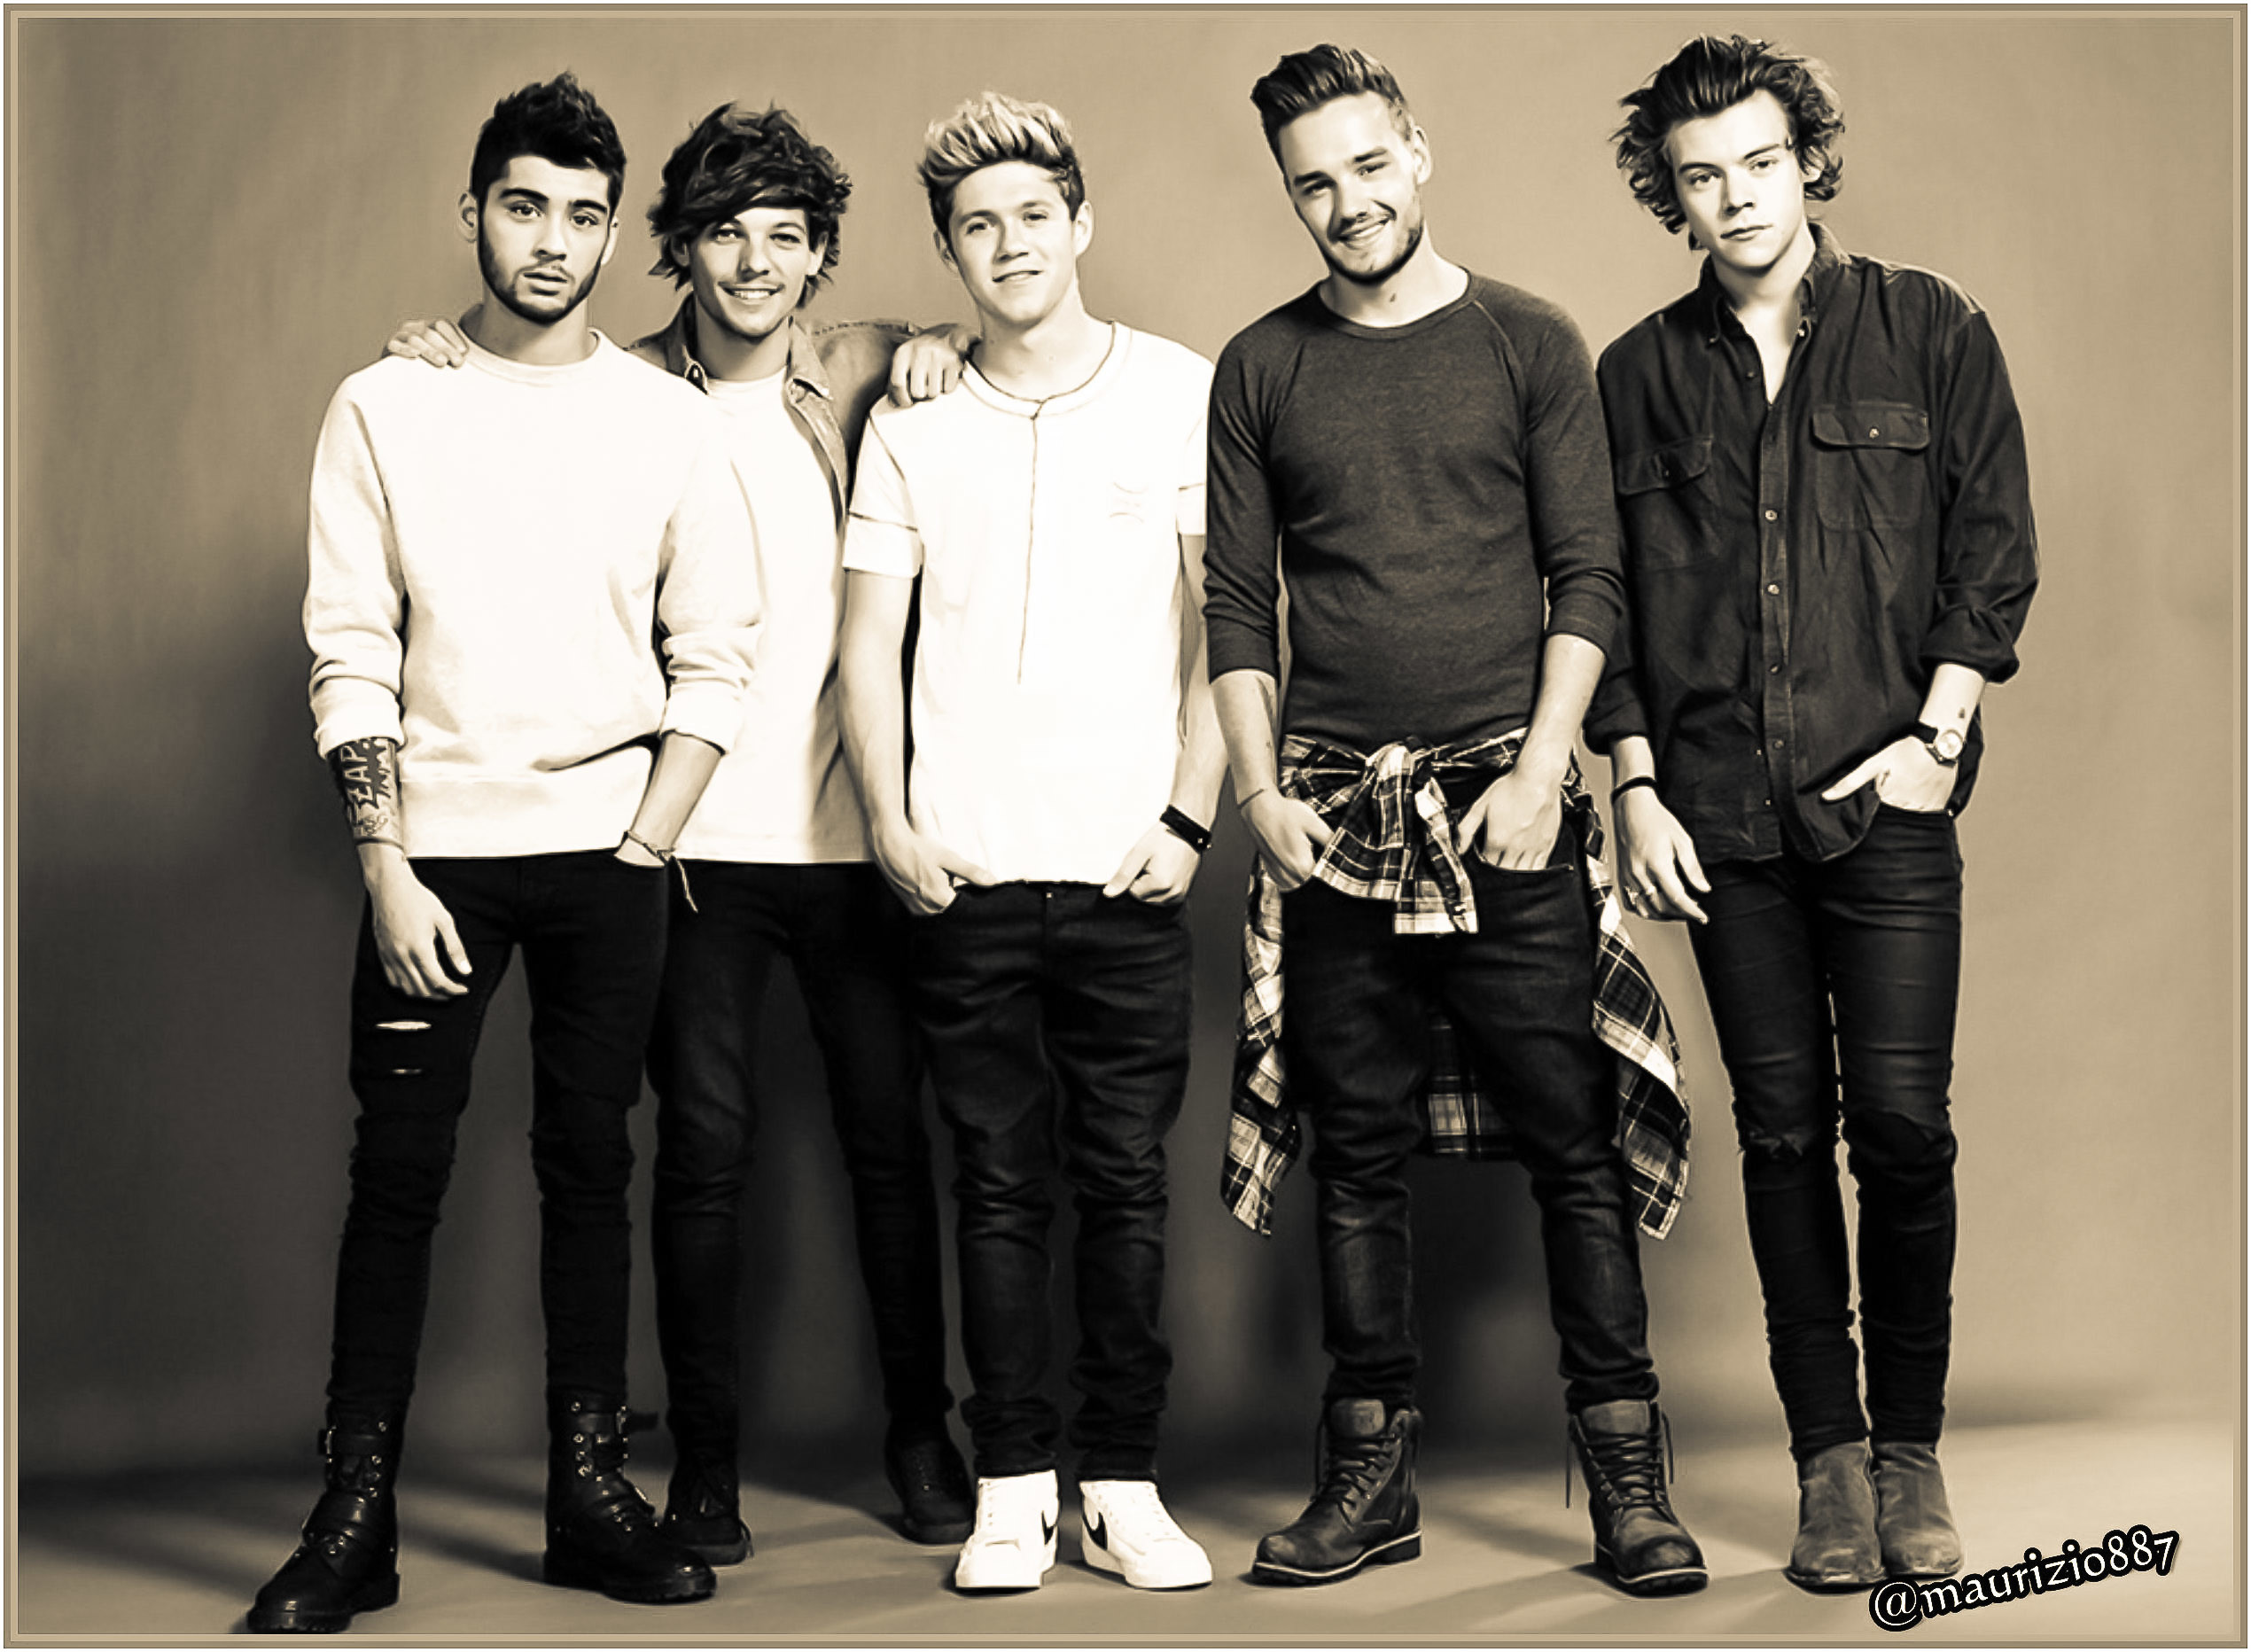 2540x1864 one direction images 2014